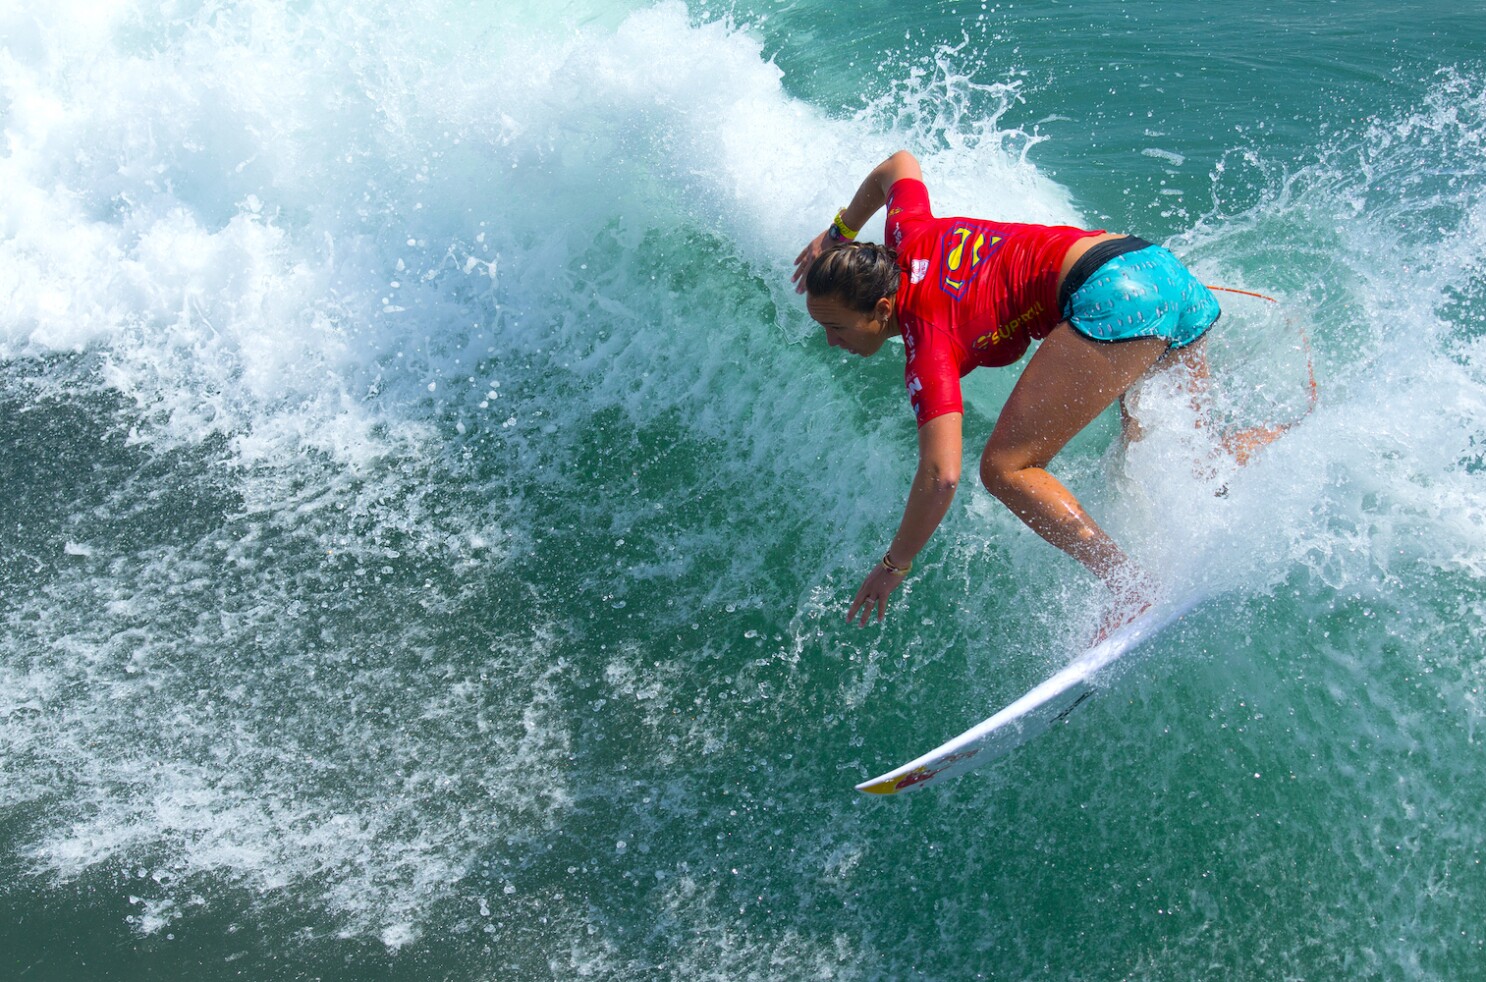 World's top surfers to compete at Super Girl Surf Pro on Sept. 17 Encinitas Advocate